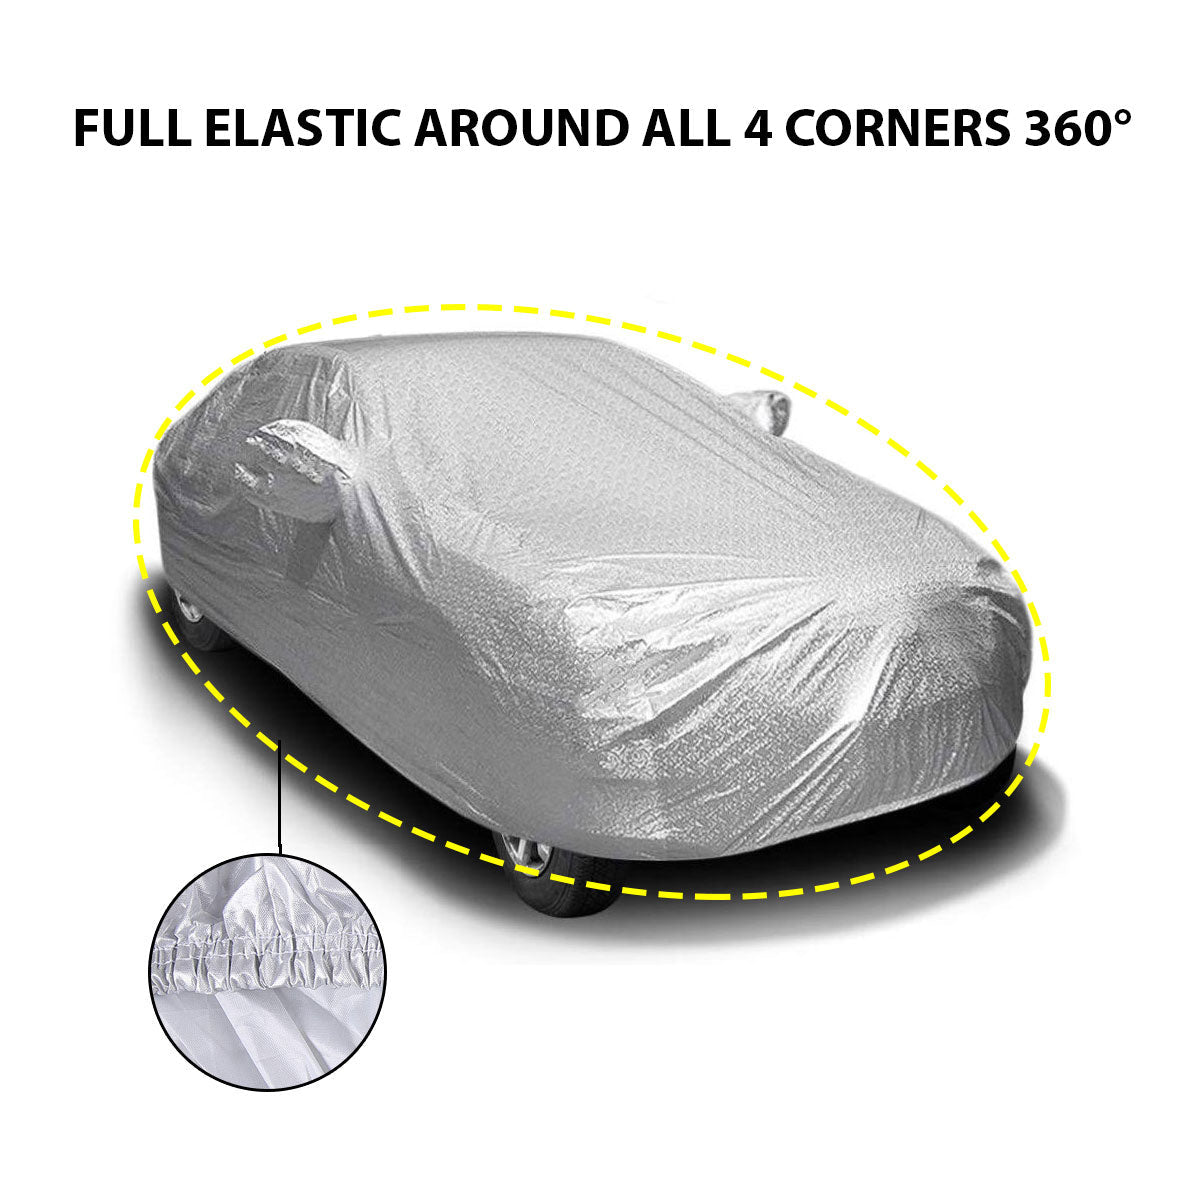 Oshotto Spyro Silver Anti Reflective, dustproof and Water Proof Car Body Cover with Mirror Pockets For Skoda Rapid